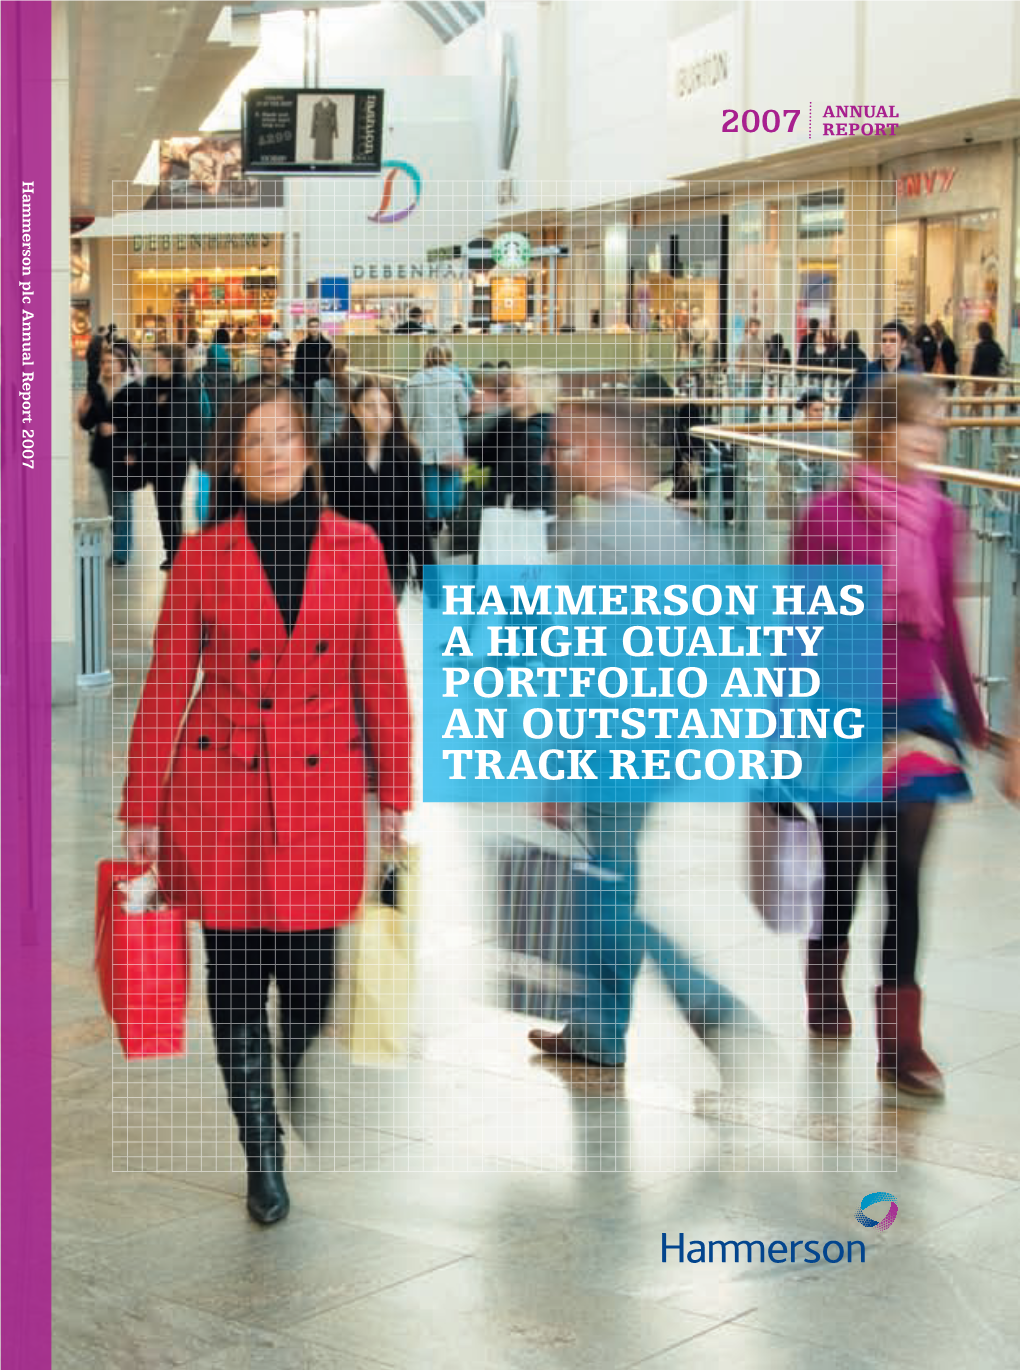 HAMMERSON HAS a High Quality Portfolio and an OUTSTANDING TRACK RECORD